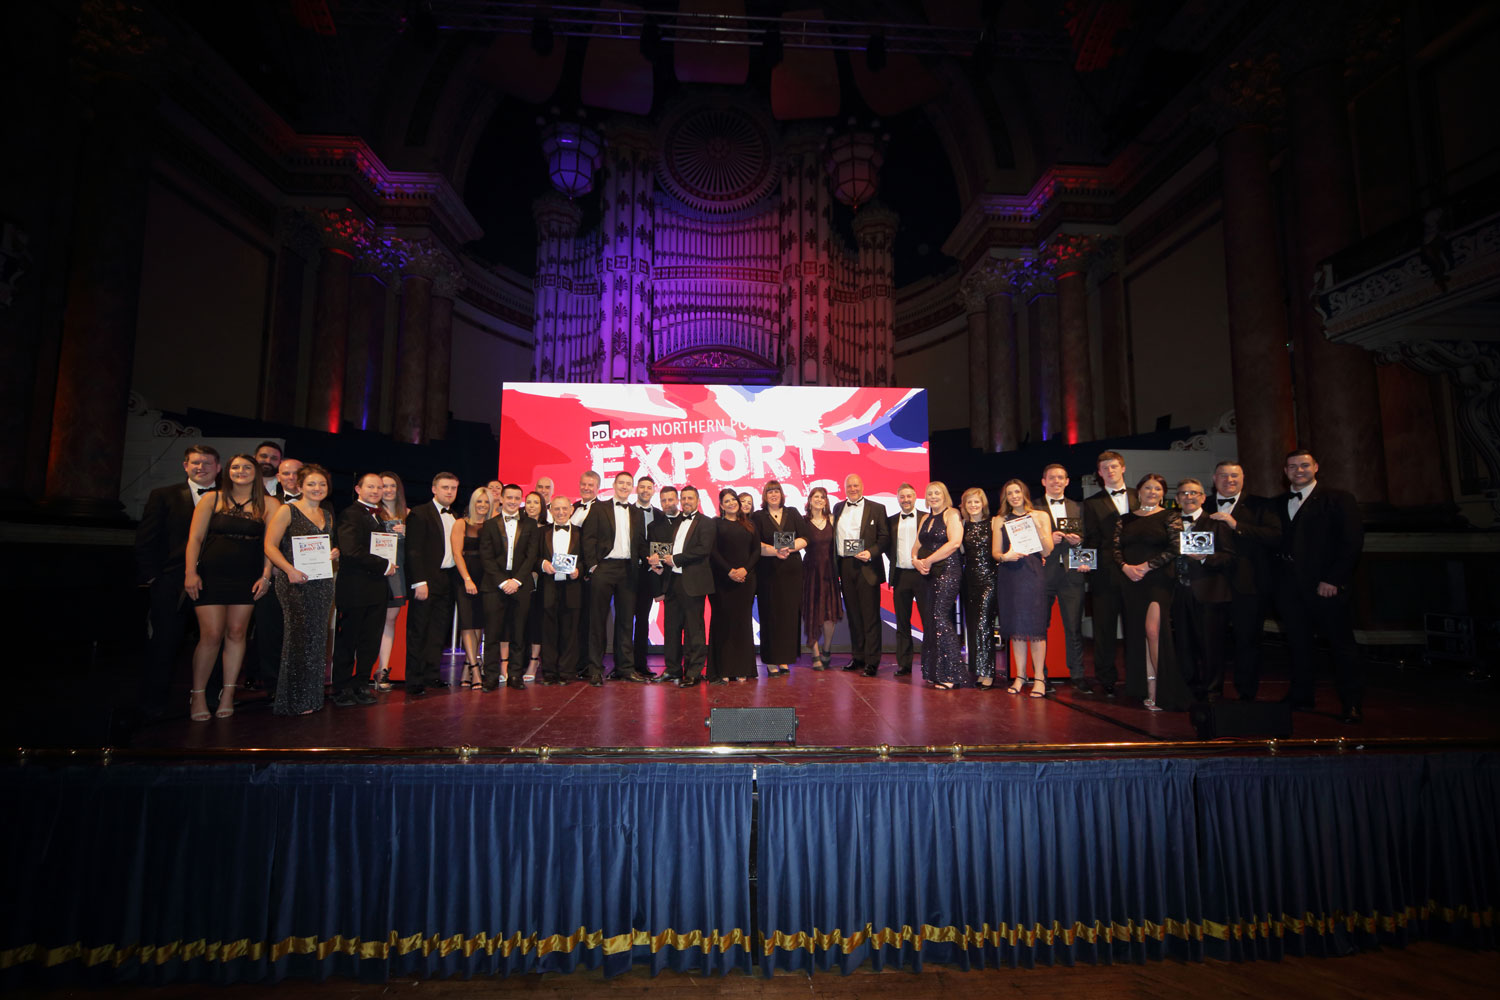 Winners of the Northern Powerhouse award for E-commerce Exporter